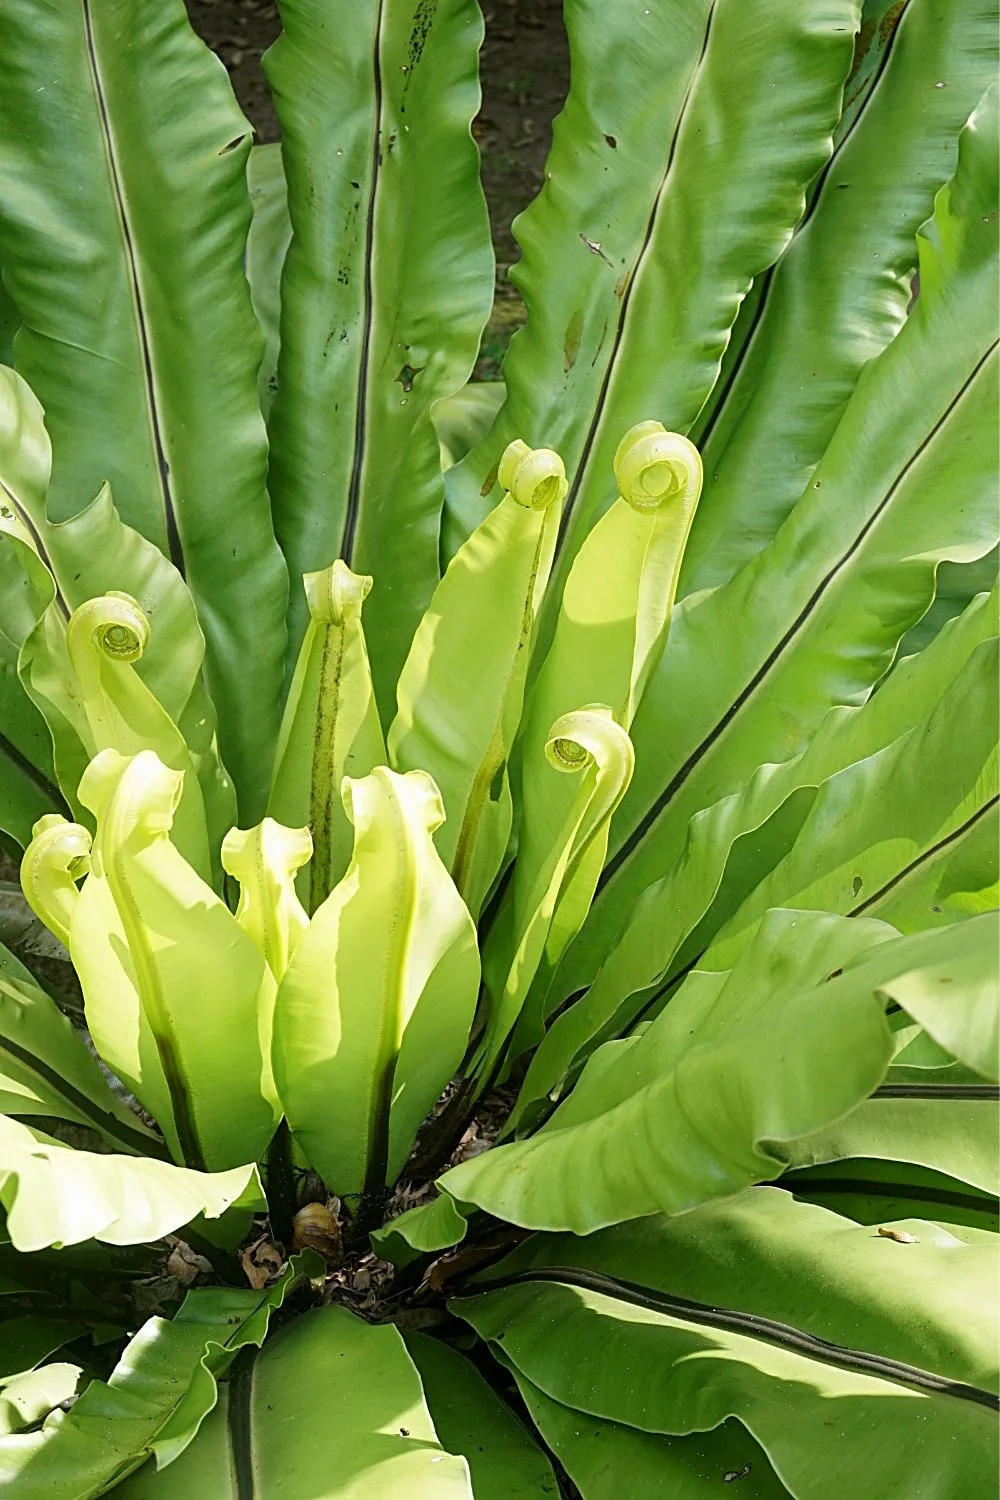 Though the Bird's Nest Fern is great to place near lounges and chairs, its watering requirement makes it hard to grow